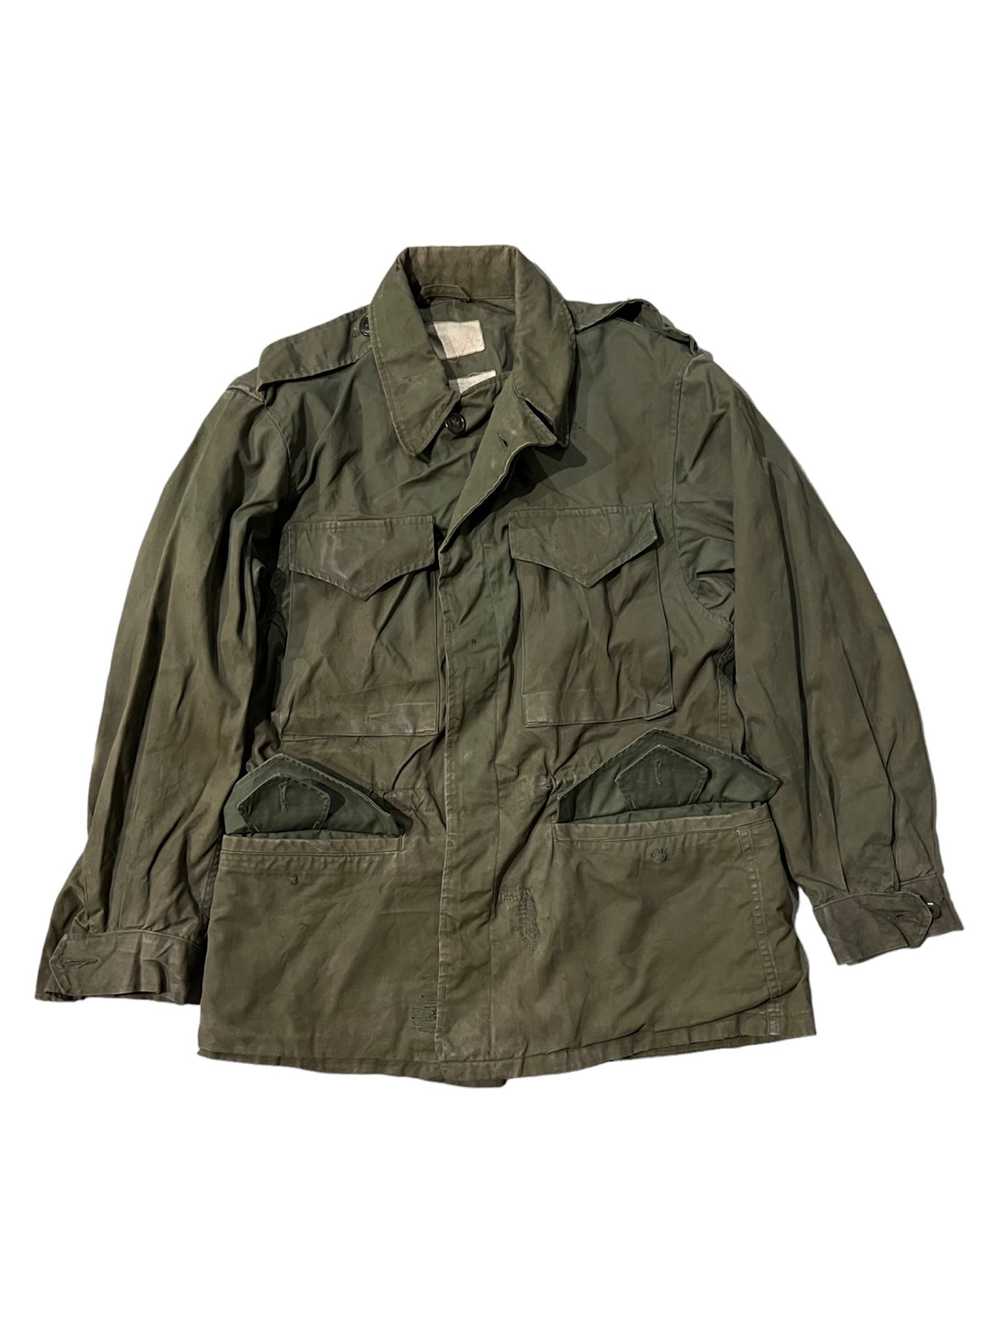 Archival Clothing × Military × Vintage VERY RARE … - image 6